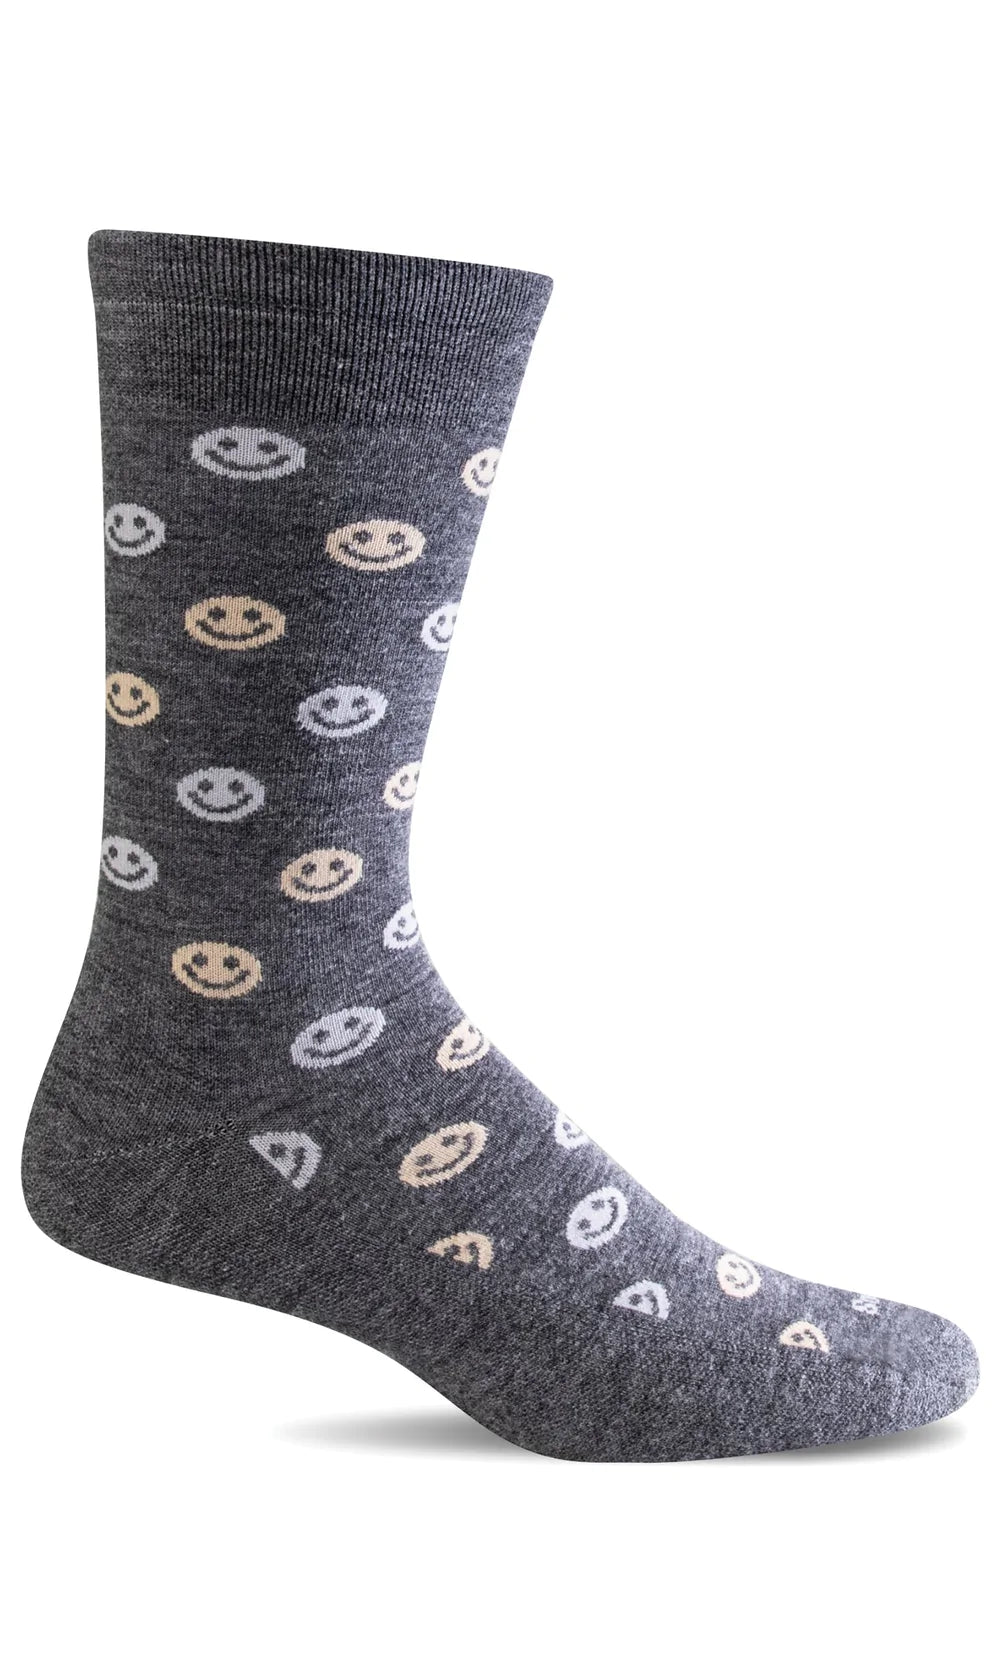 Happy Charcoal Everyday Sock (Men's size scale)